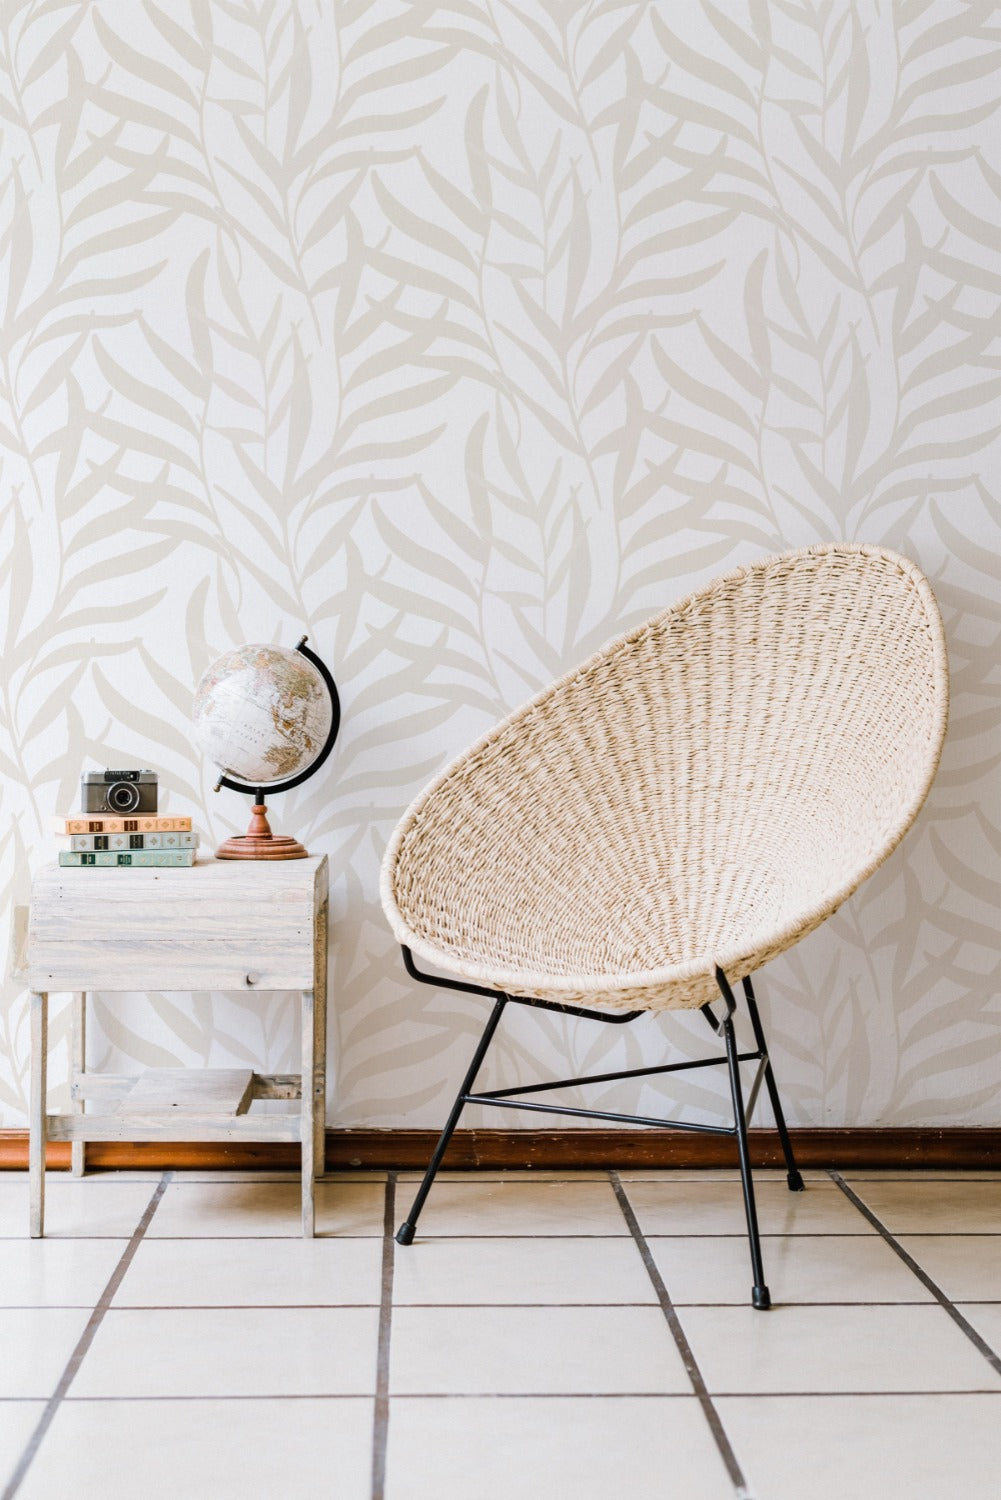 Interior design setting with 'Earthy Wallpaper' covering the wall, complemented by a rustic white sidetable with a globe and camera on top, and a woven rattan chair in the foreground, all contributing to a peaceful, earthy vibe.